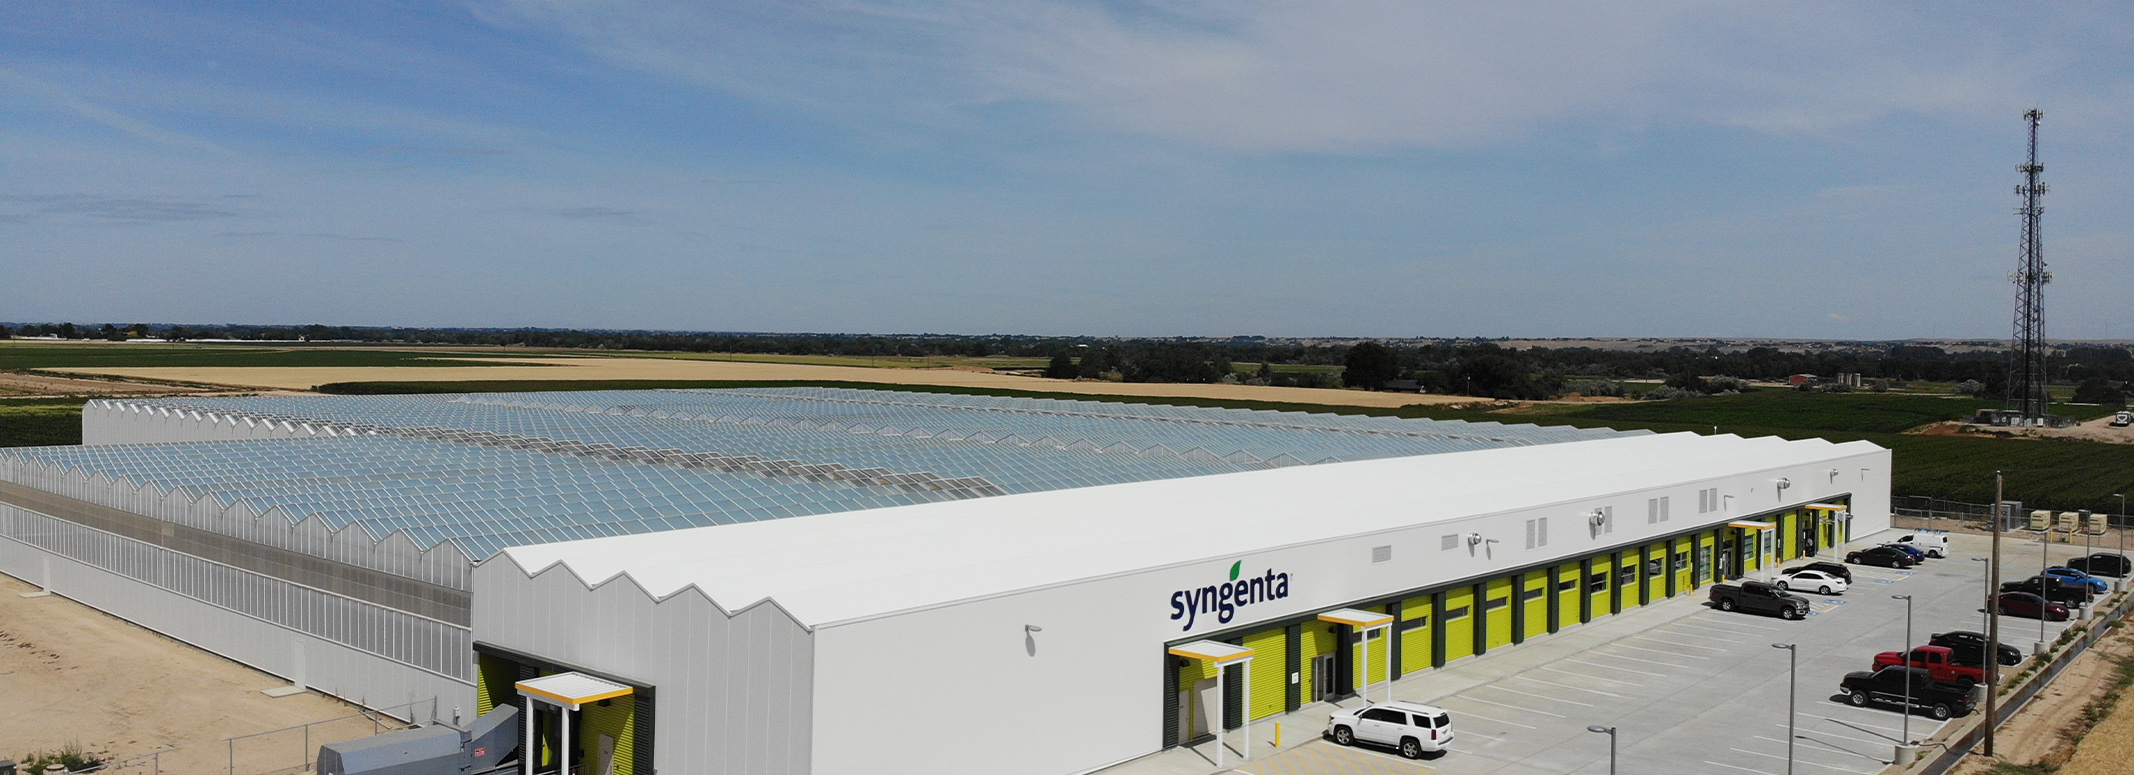 35 North Provides Project Management for Syngenta's Trait Conversion Accelerator in Nampa, Idaho